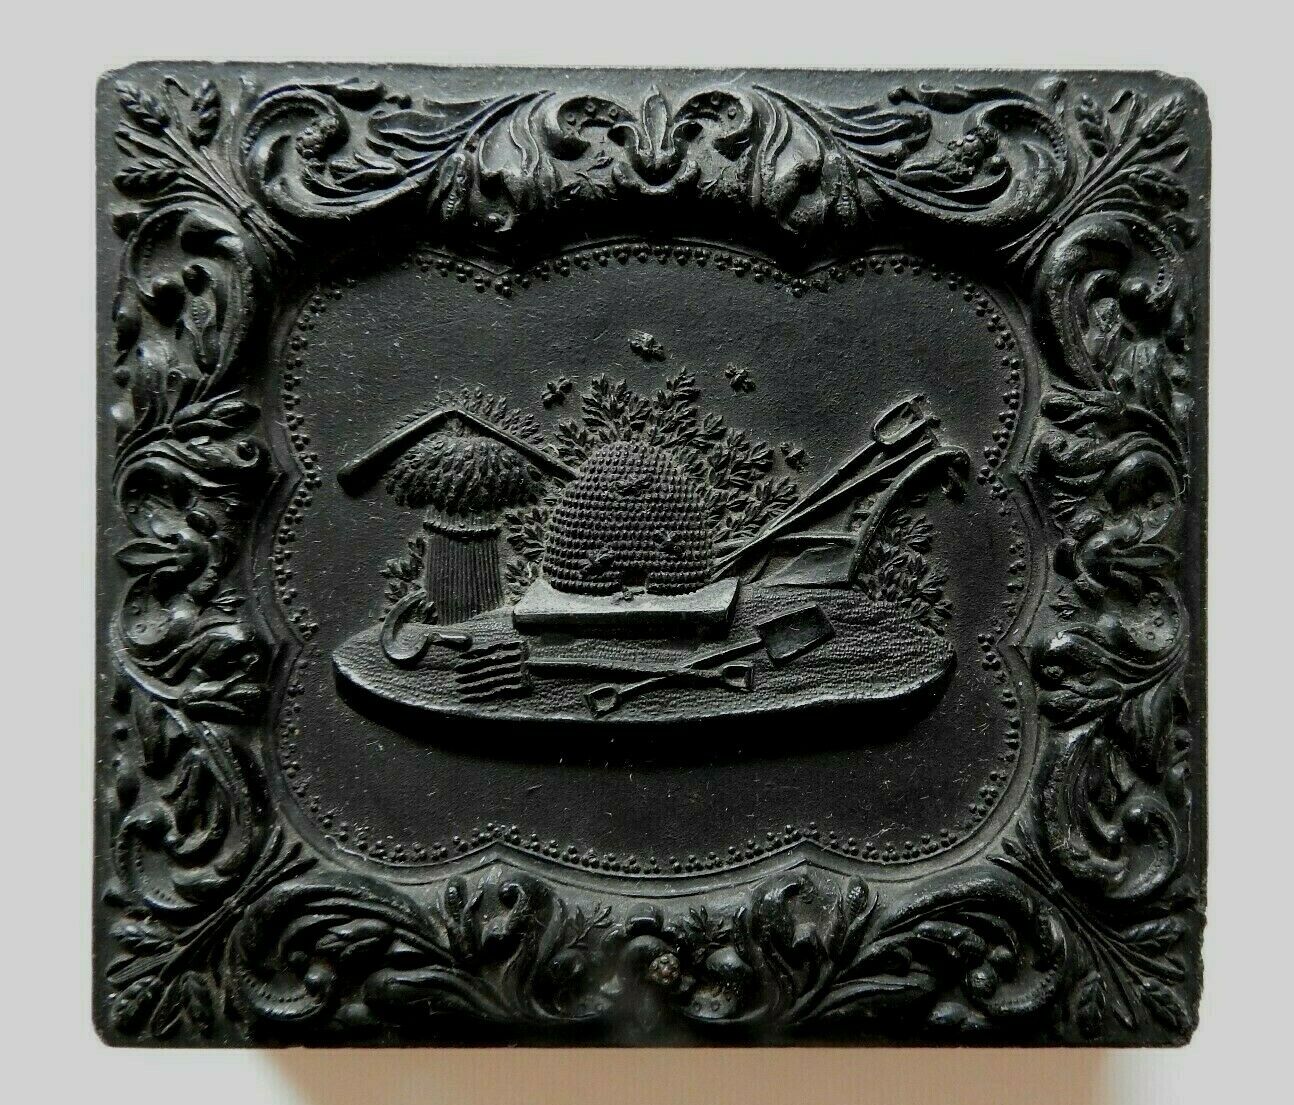 1857 UNION 1/4 PLATE THERMOPLASTIC CASE FARMING WHEAT-BEE KEEPING-PLOW